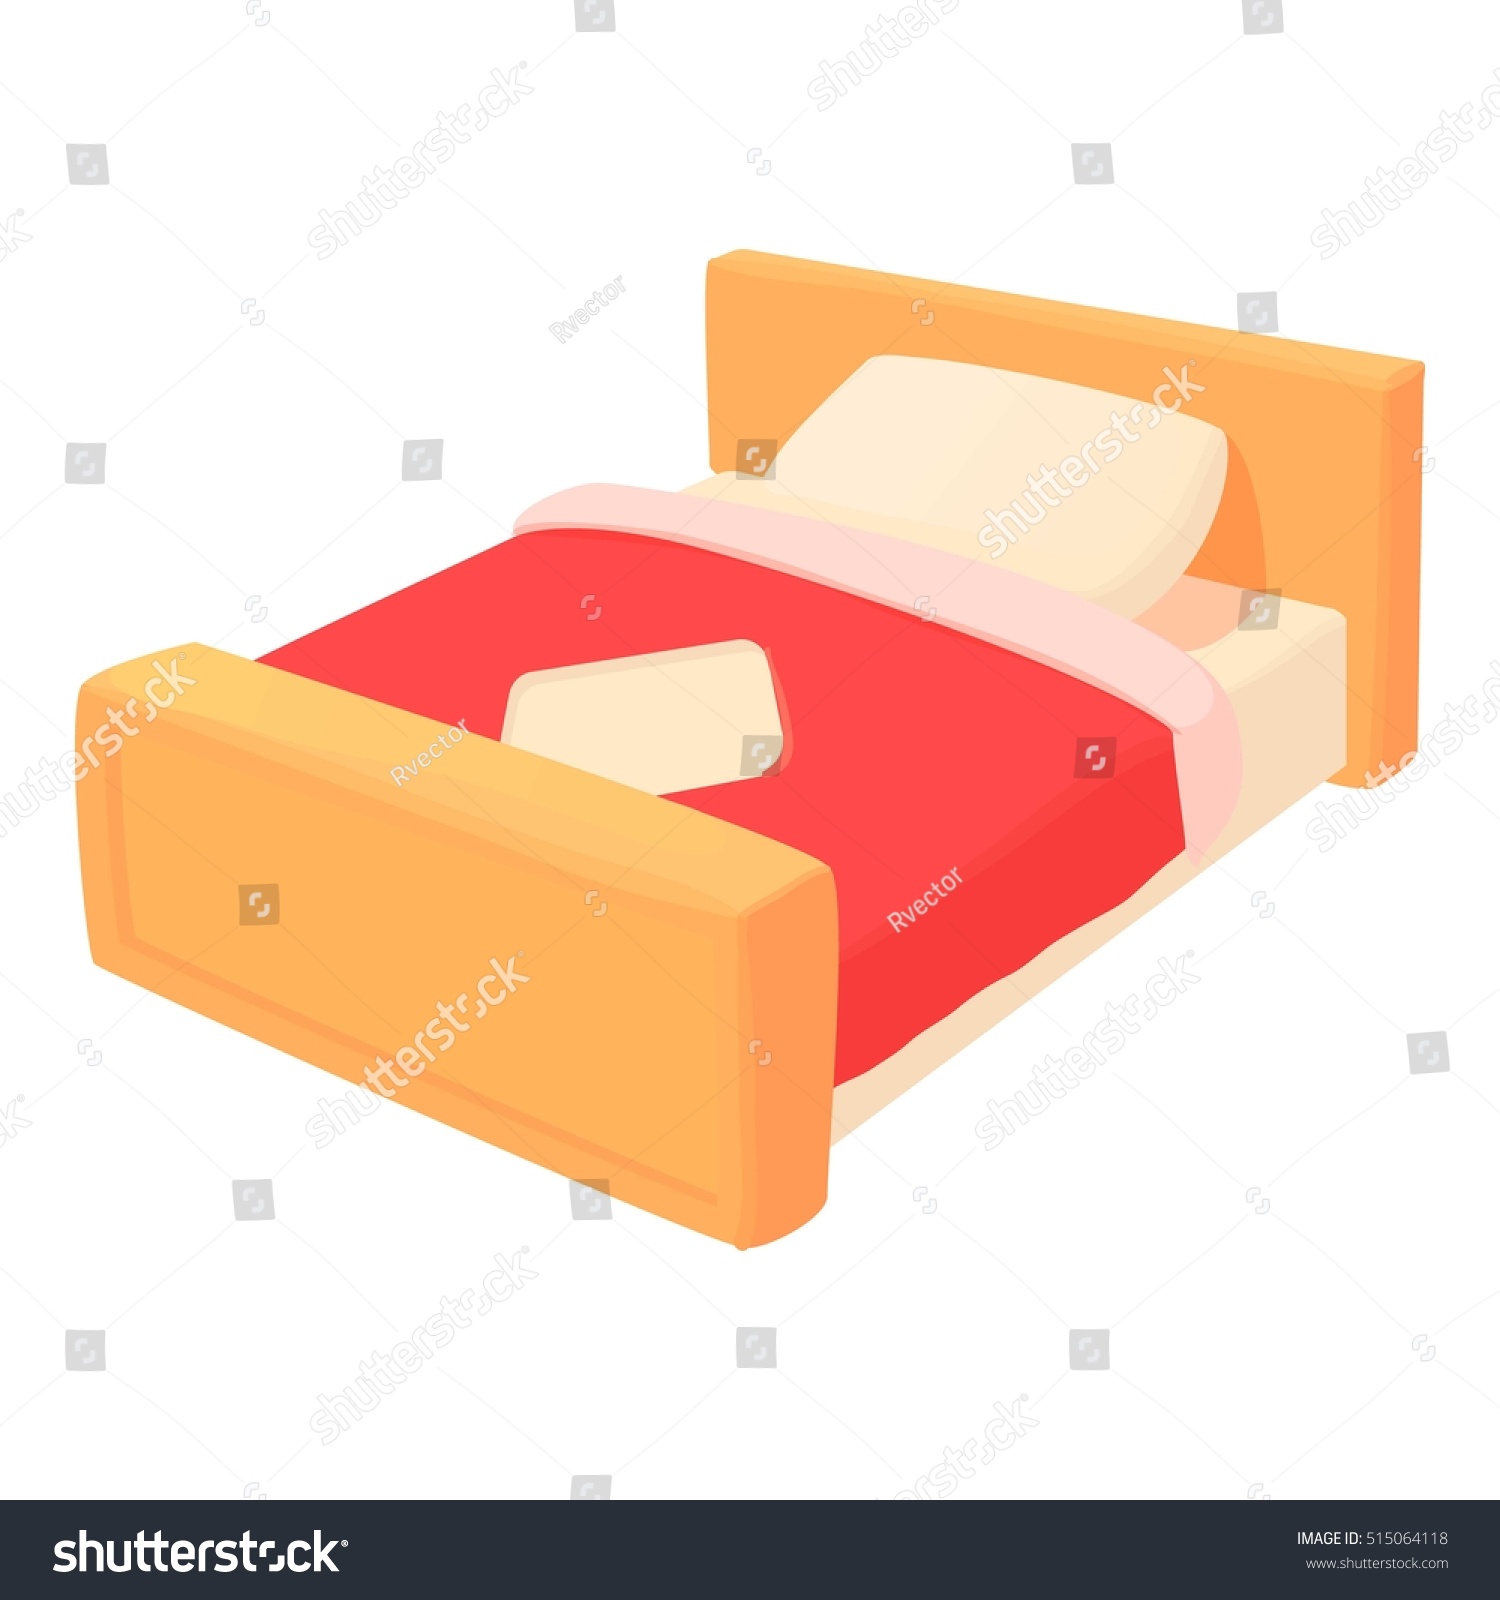 Bed Icon Cartoon Illustration Bed Vector Stock Vector (Royalty Free